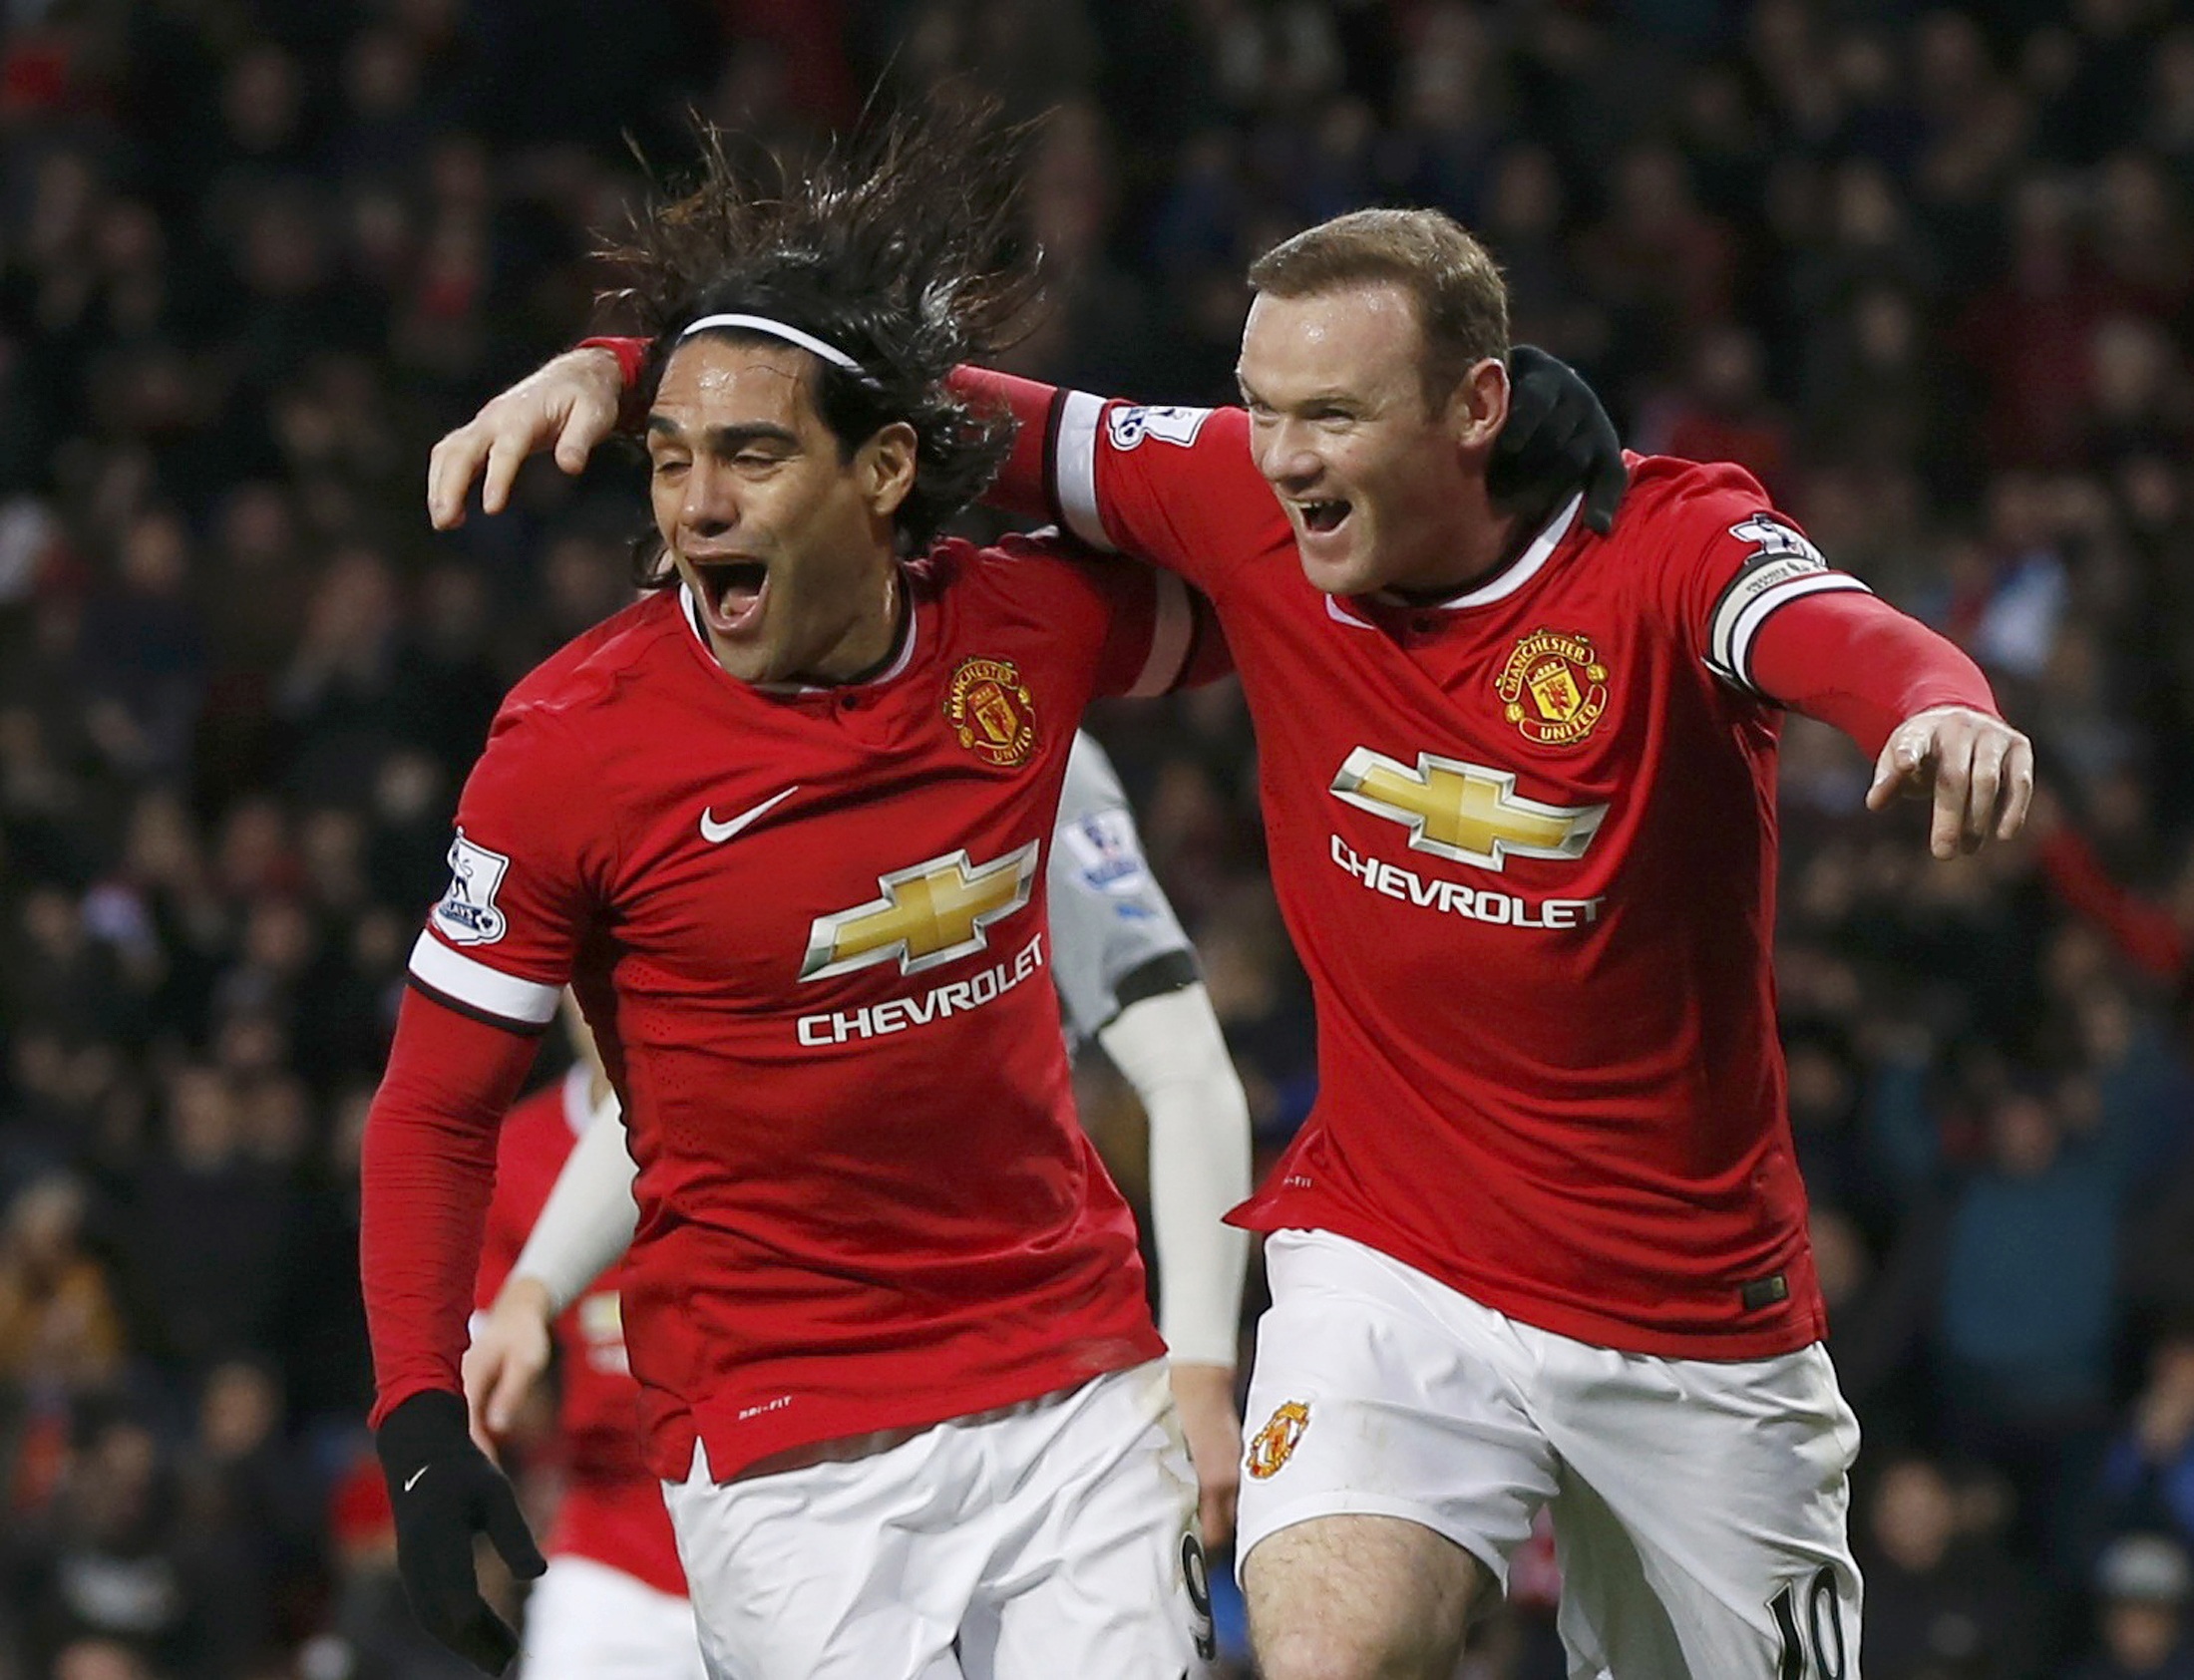 Manchester United's Wayne Rooney celebrates after scoring a goal against Newcastle with team-mate Radamel Falcao during their English Premier League soccer match at Old Trafford in Manchester